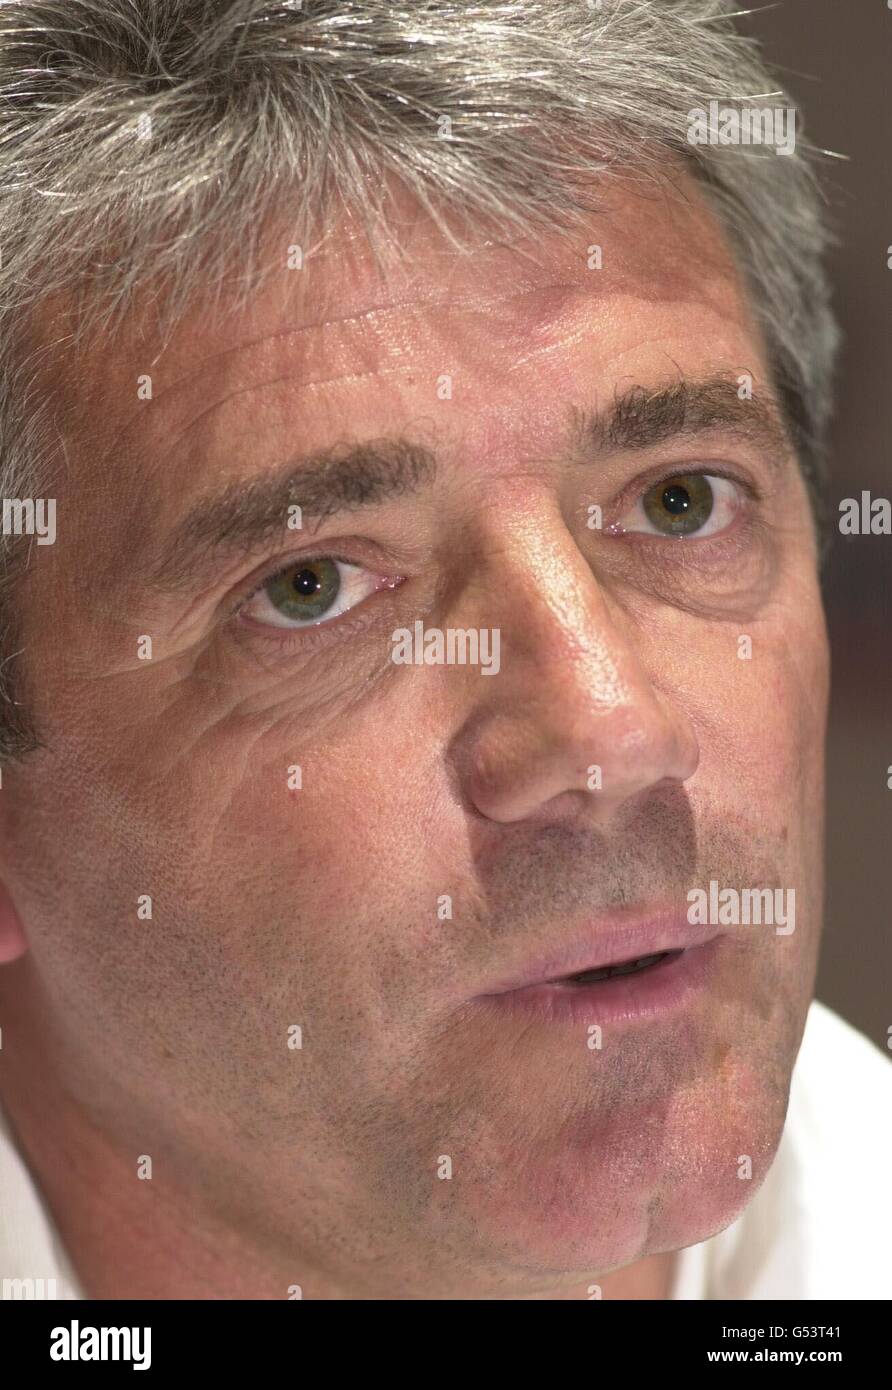 England Coach Kevin Keegan at a press conference, held in central London, announcing the England squad for their friendly match against France. 26/10/2004 Manchester City boss Kevin Keegan, who is in the dock over his face-to-face confrontation with referee Steve Dunn in the tunnel after Sunday's 4-3 defeat to Newcastle. Keegan had predicted he would be fined by the FA for his outspoken criticism of Dunn's handling of the game but even though he branded Dunn 'a homer' in the aftermath of the St James' Park encounter, it is not his post-game media comments which landed him in trouble. See PA Stock Photo